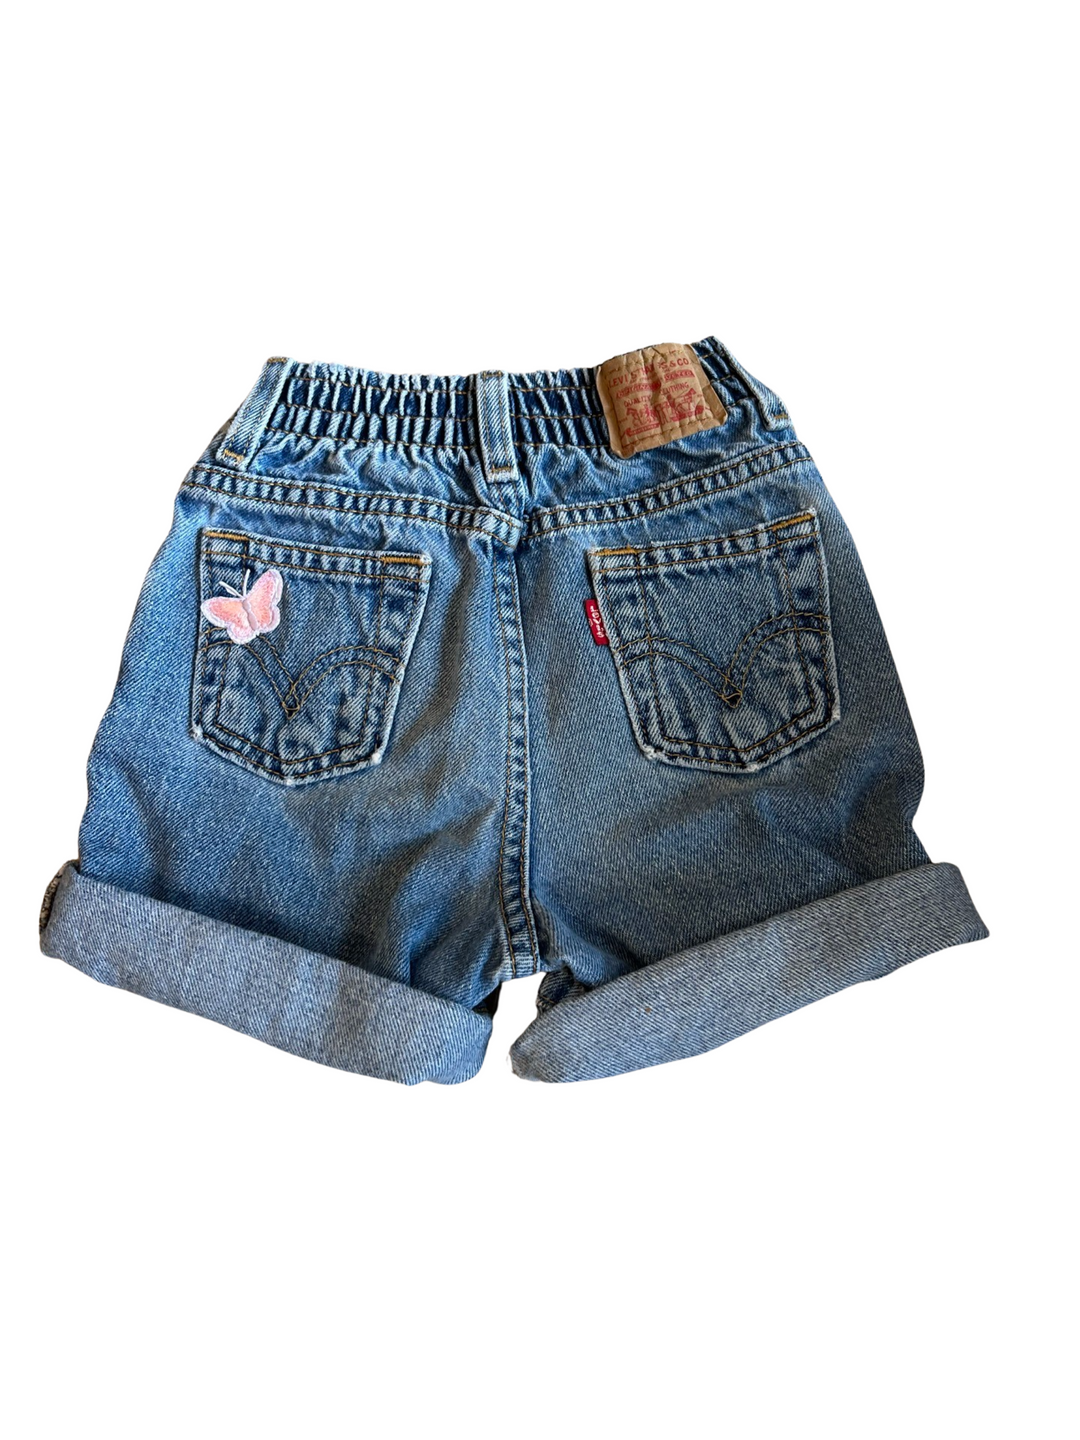 Levi's Butterfly Cuffed Shorts